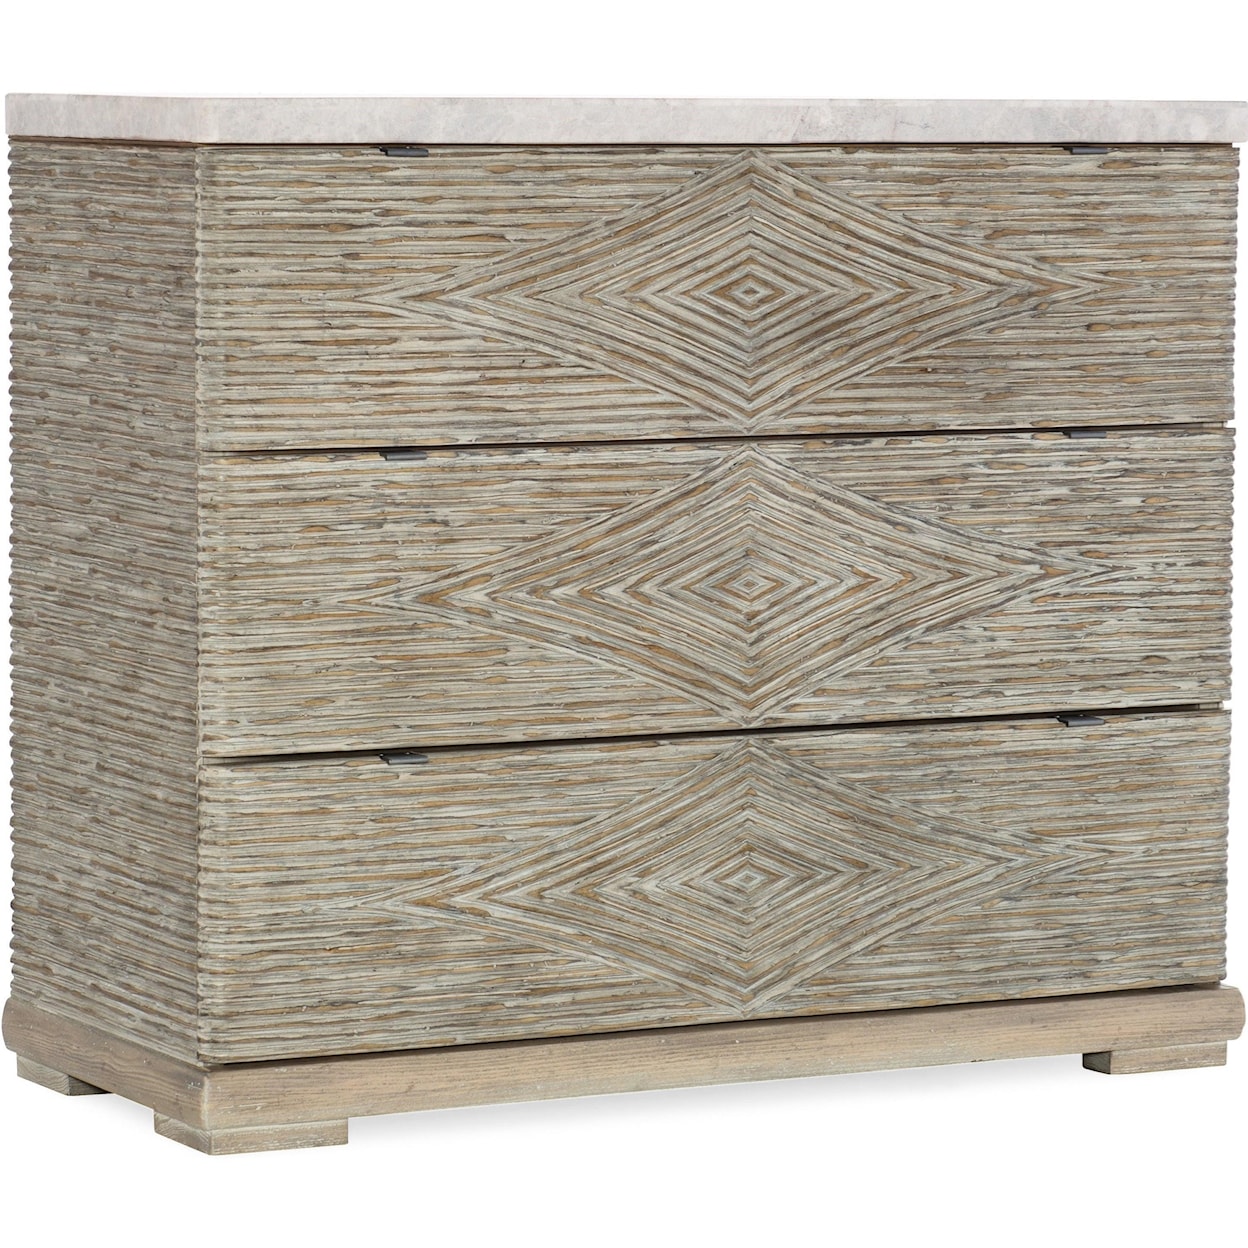 Hooker Furniture American Life Amani 3-Drawer Accent Chest